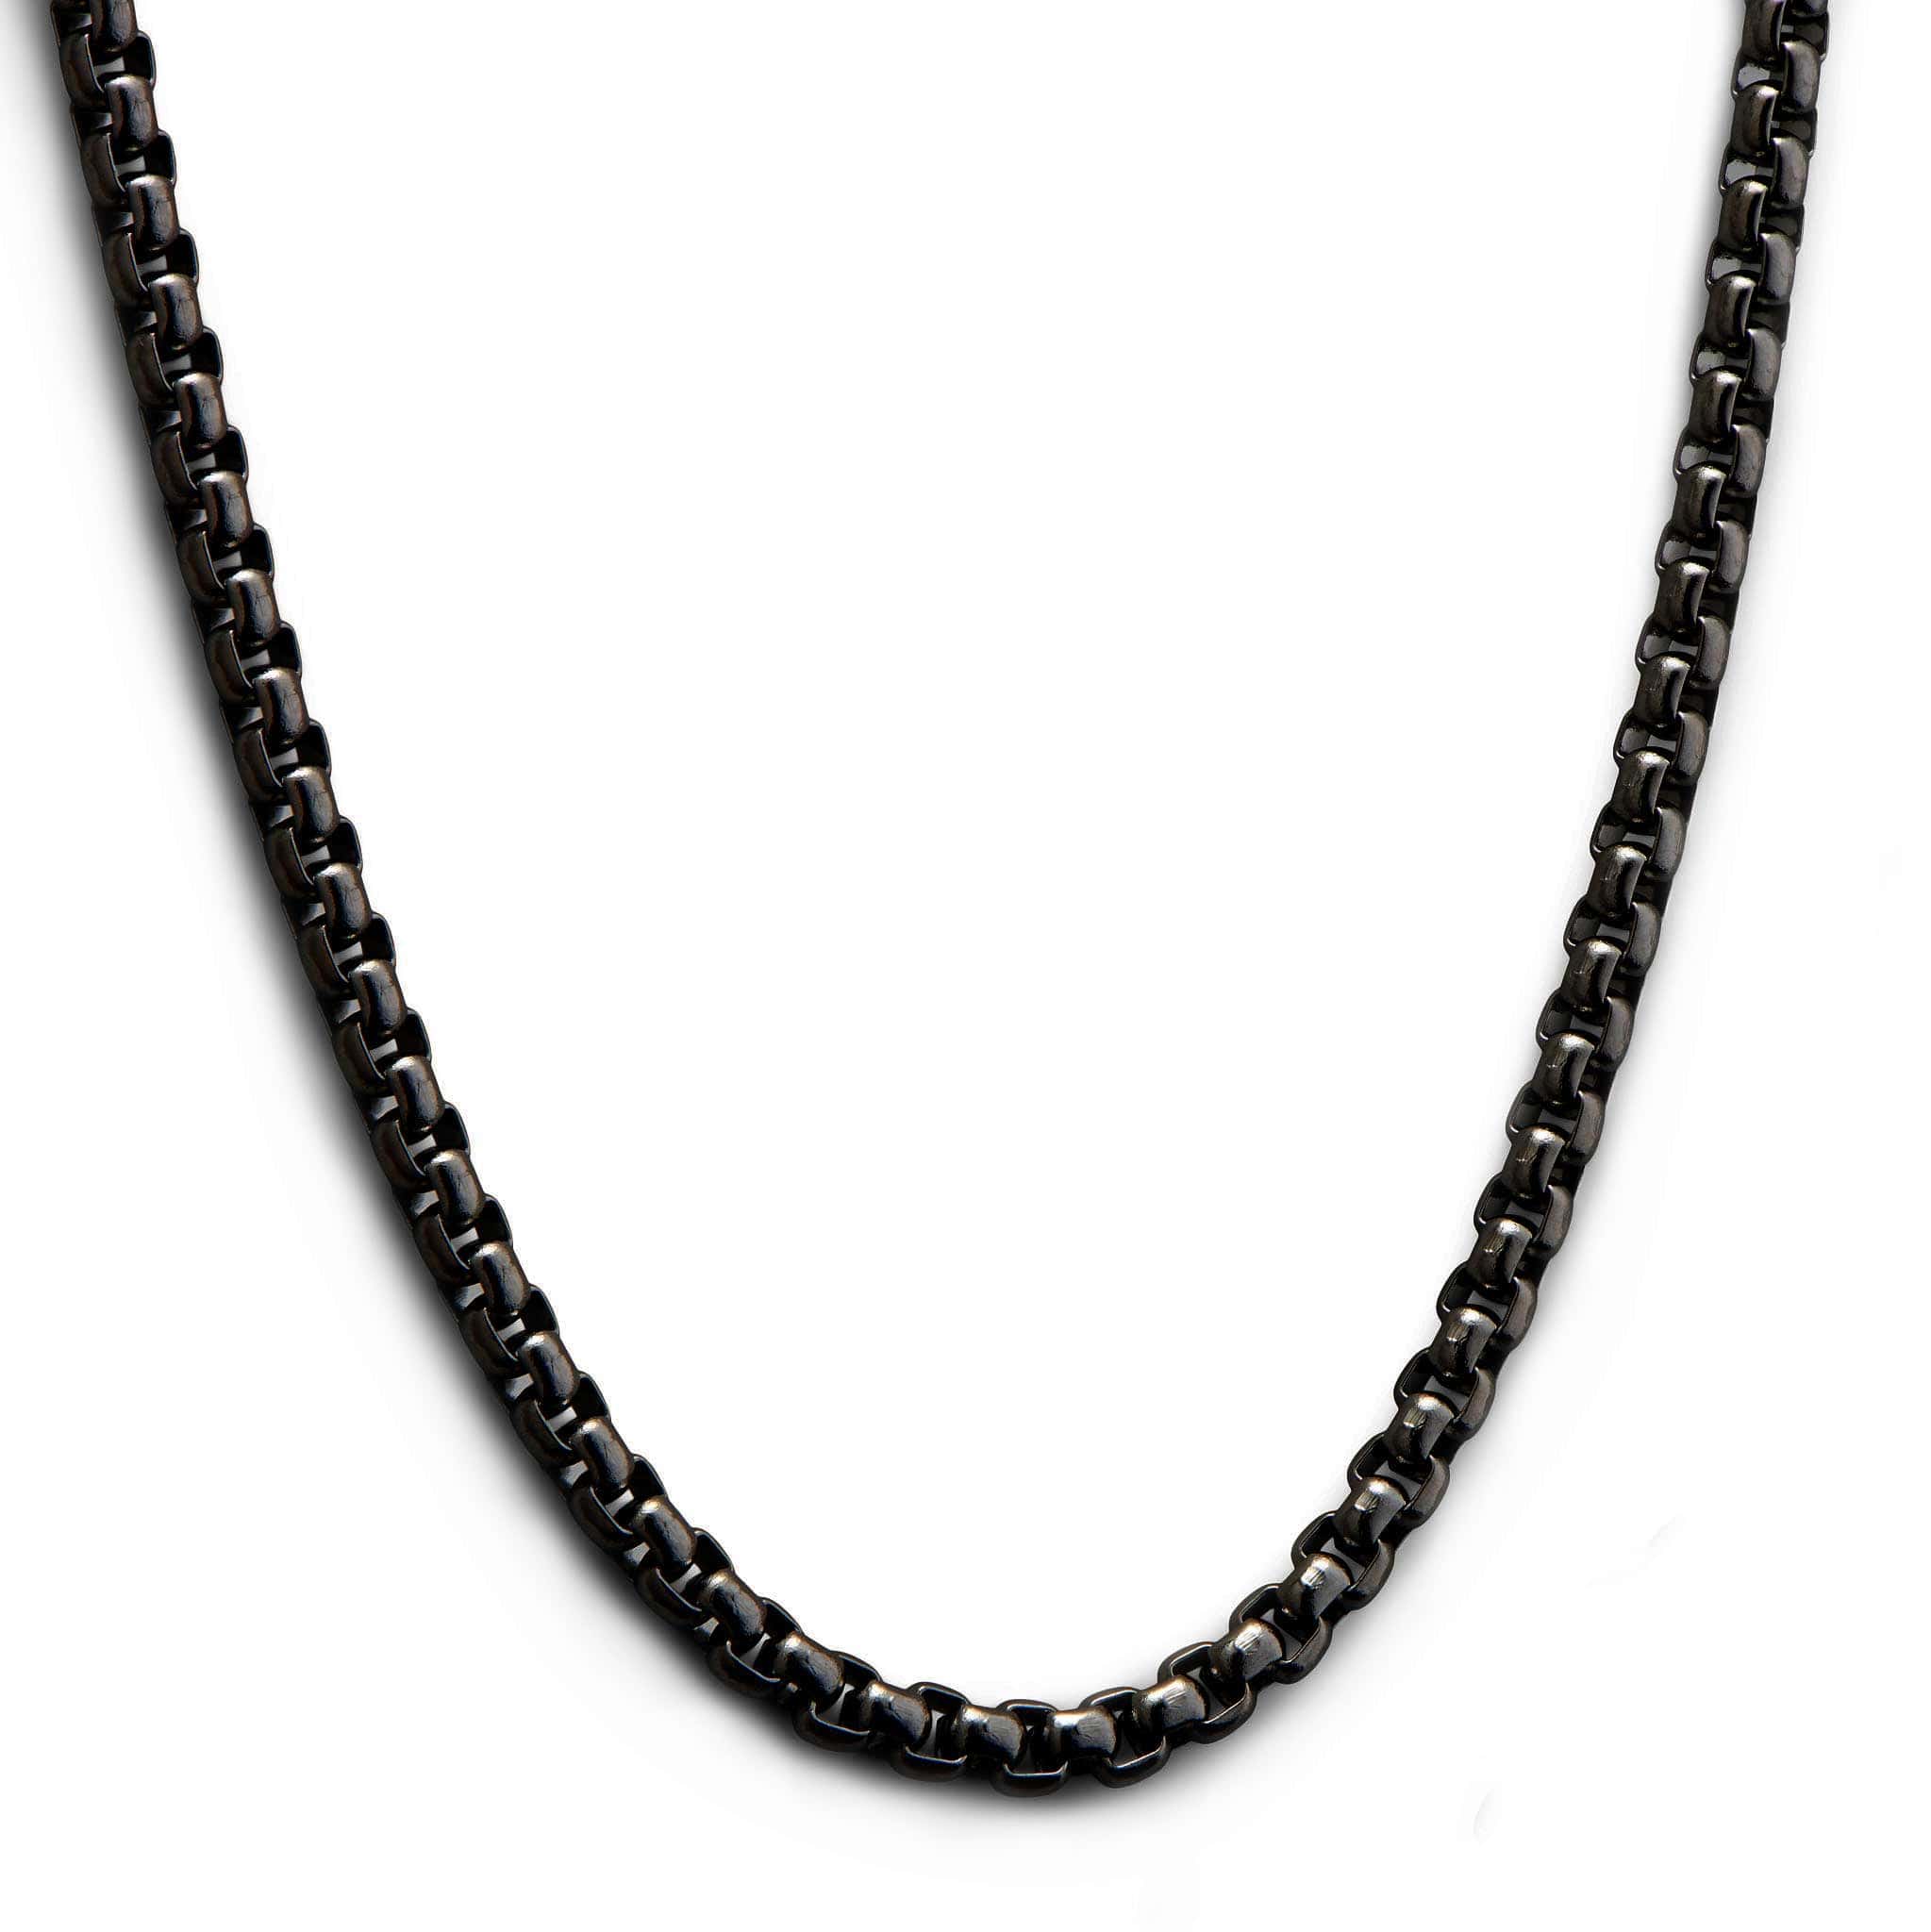 Necklace Chain Only, Chain Necklace Men Black, Box Chain Necklace